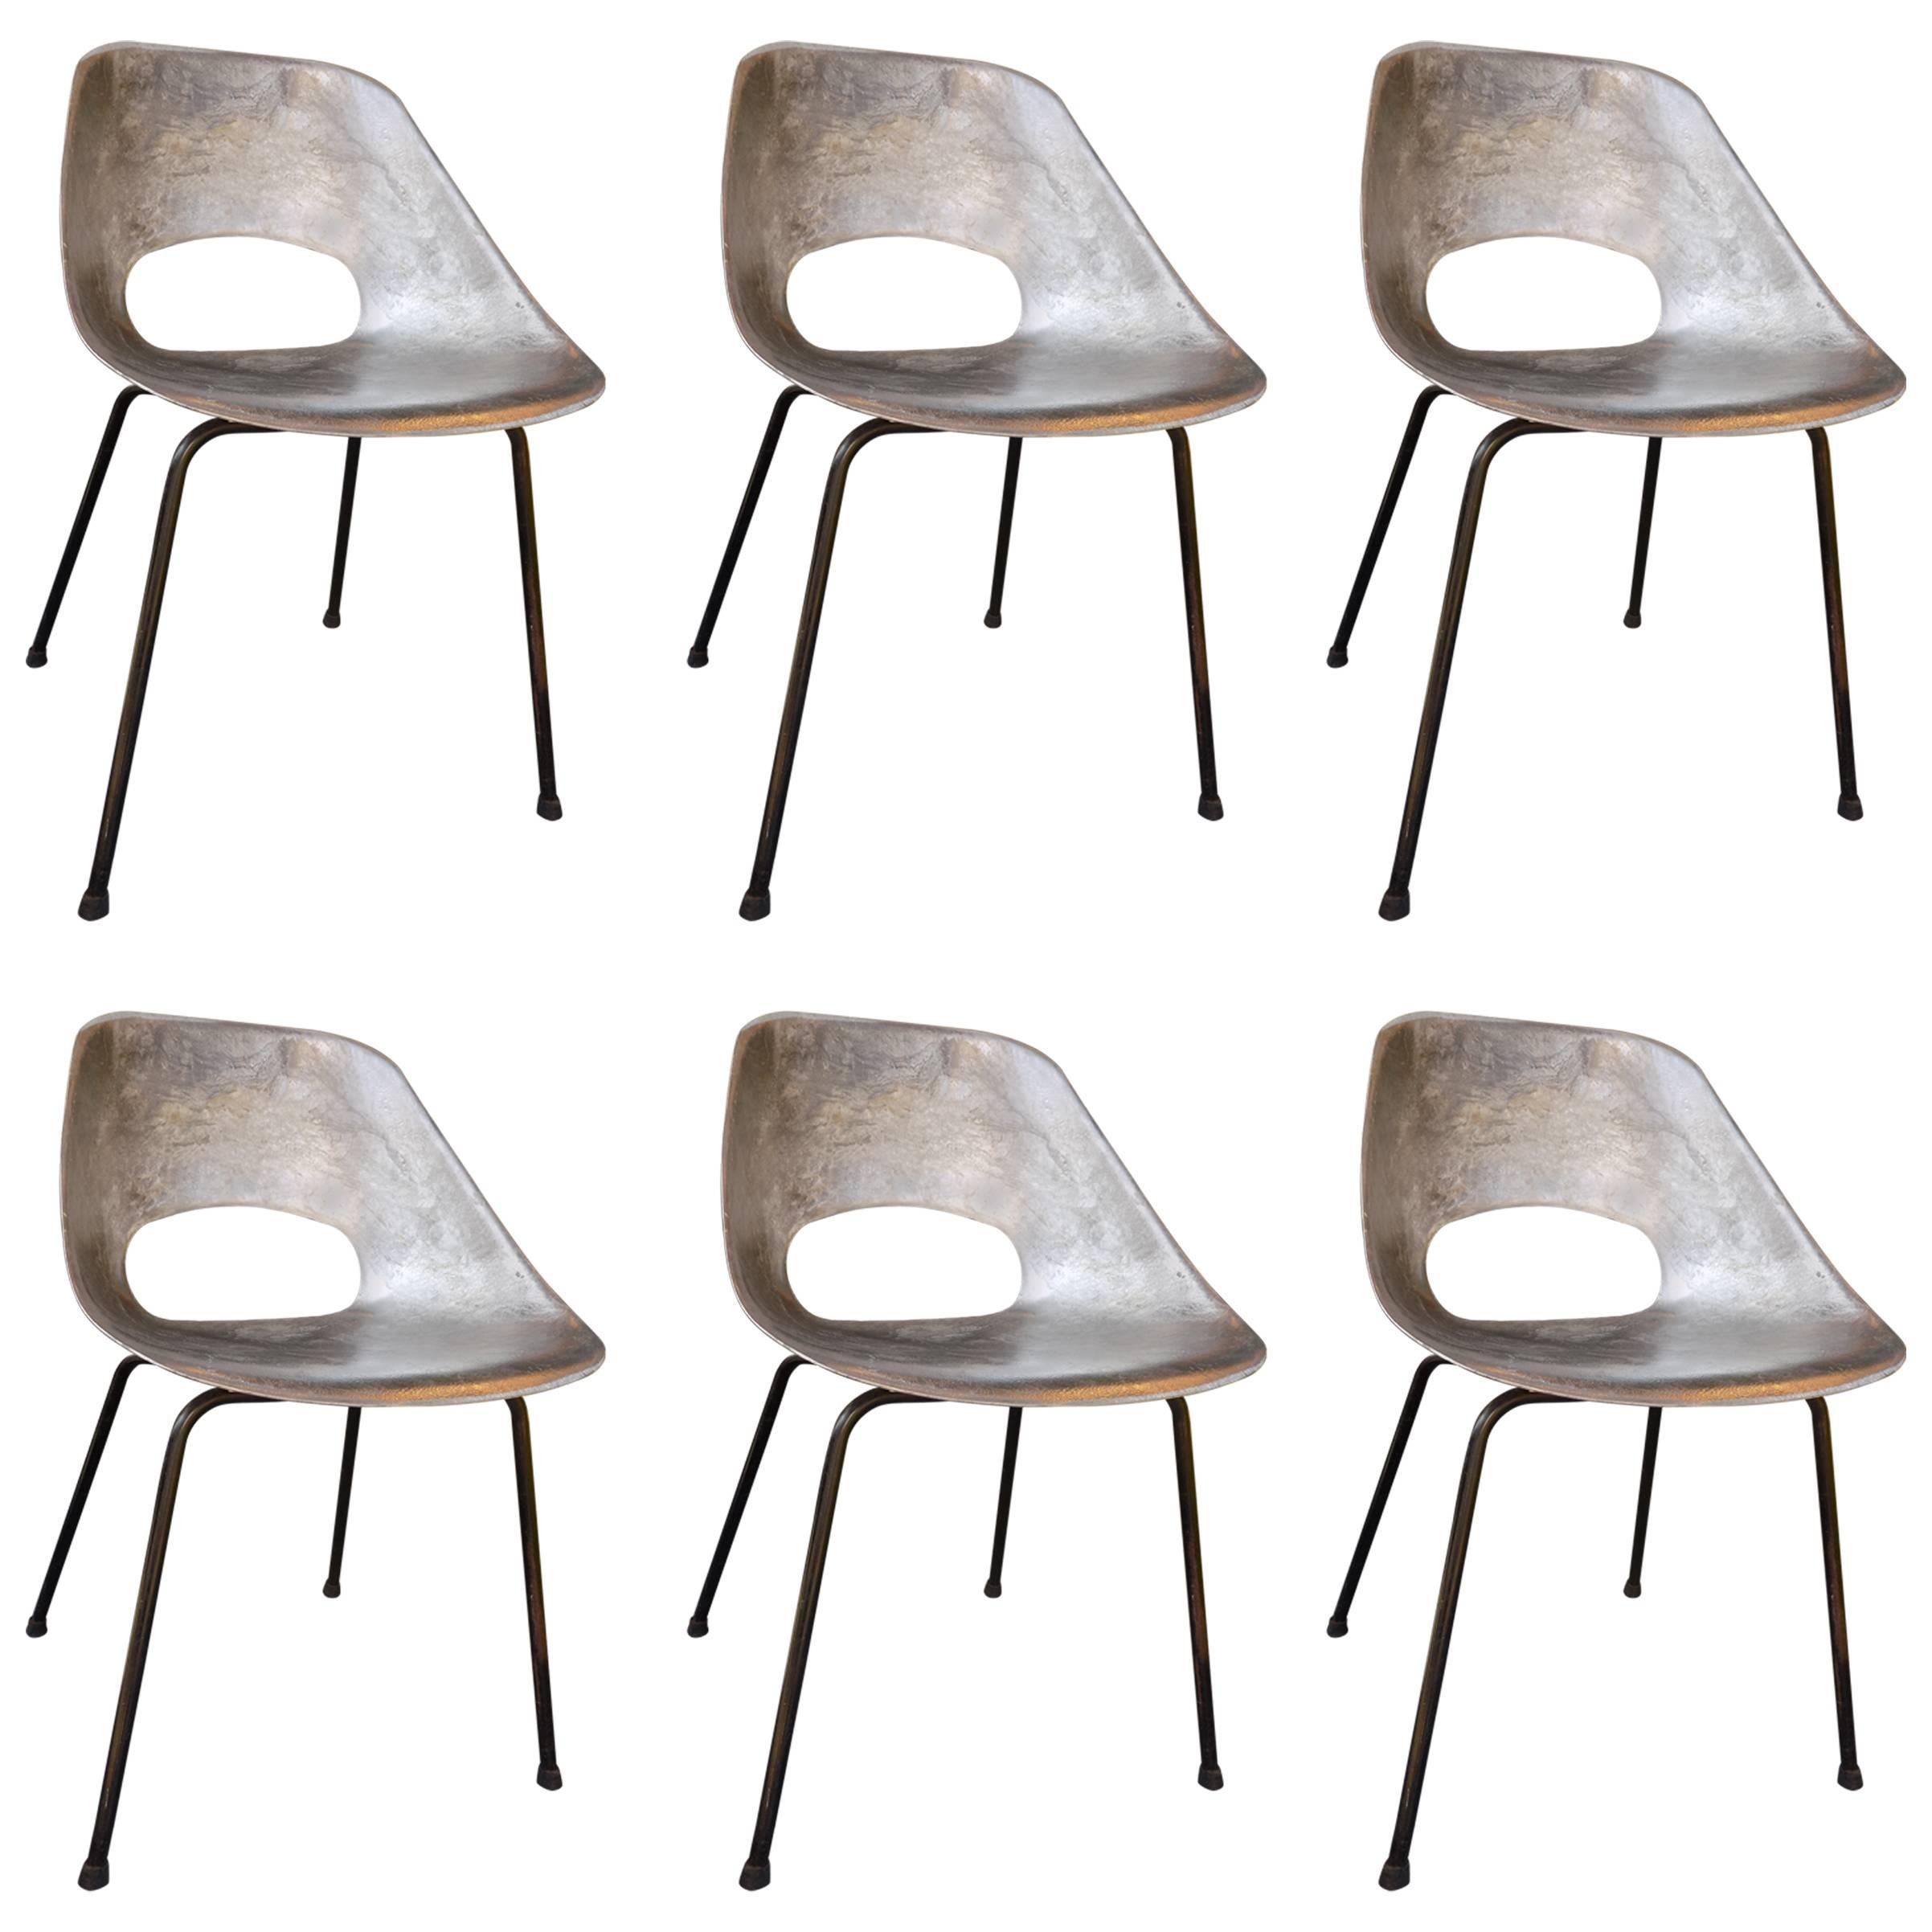 Set of Six Molded Aluminum Chairs by Pierre Guariche, France, 1950s